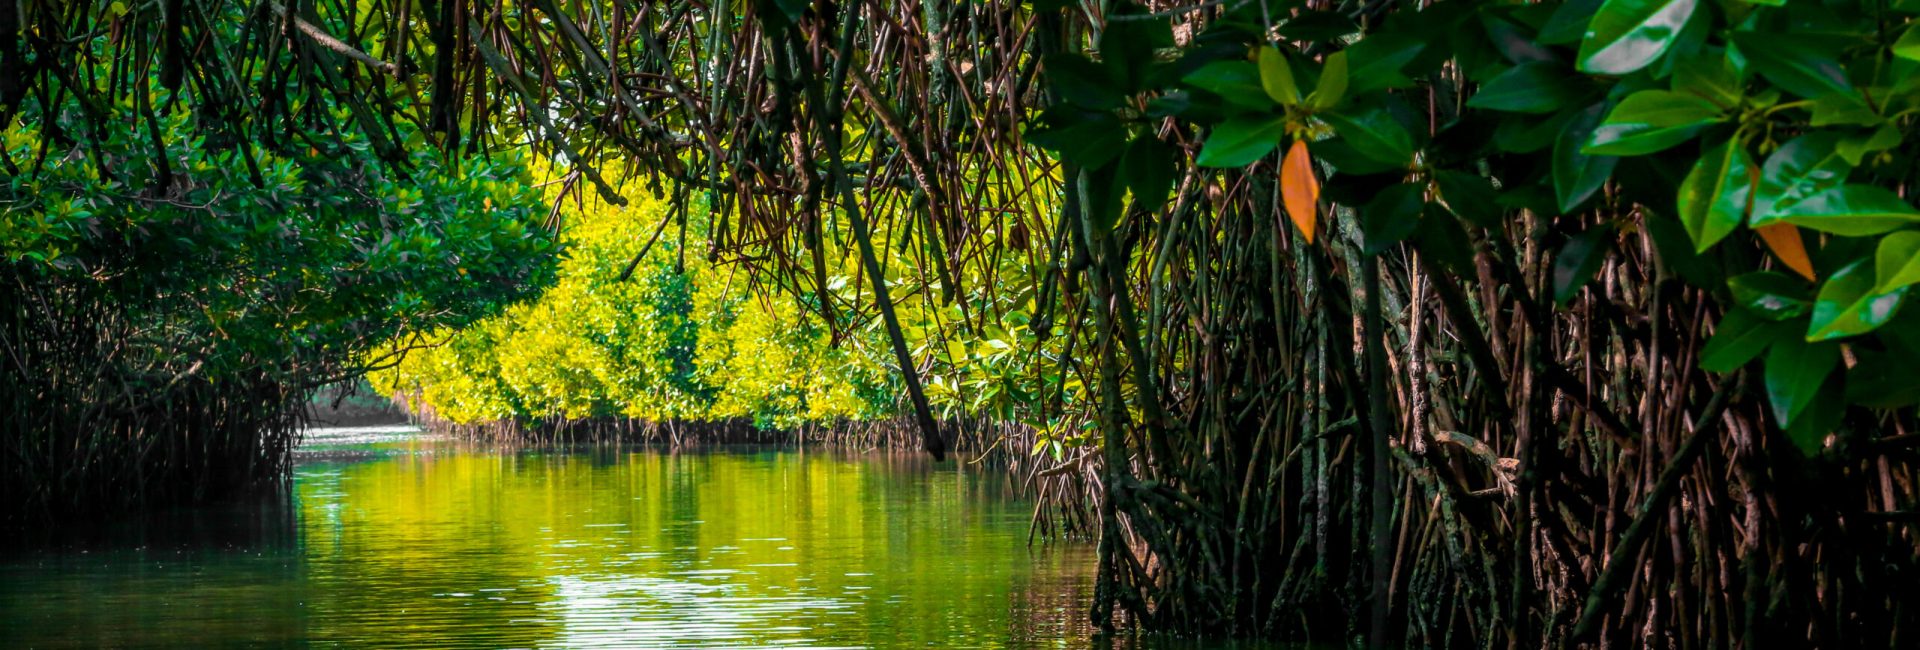 Mangrove,Forest,Reflection,In,Lake,,Submerged,Mangrove,Forest,,Mangrove,Forest,